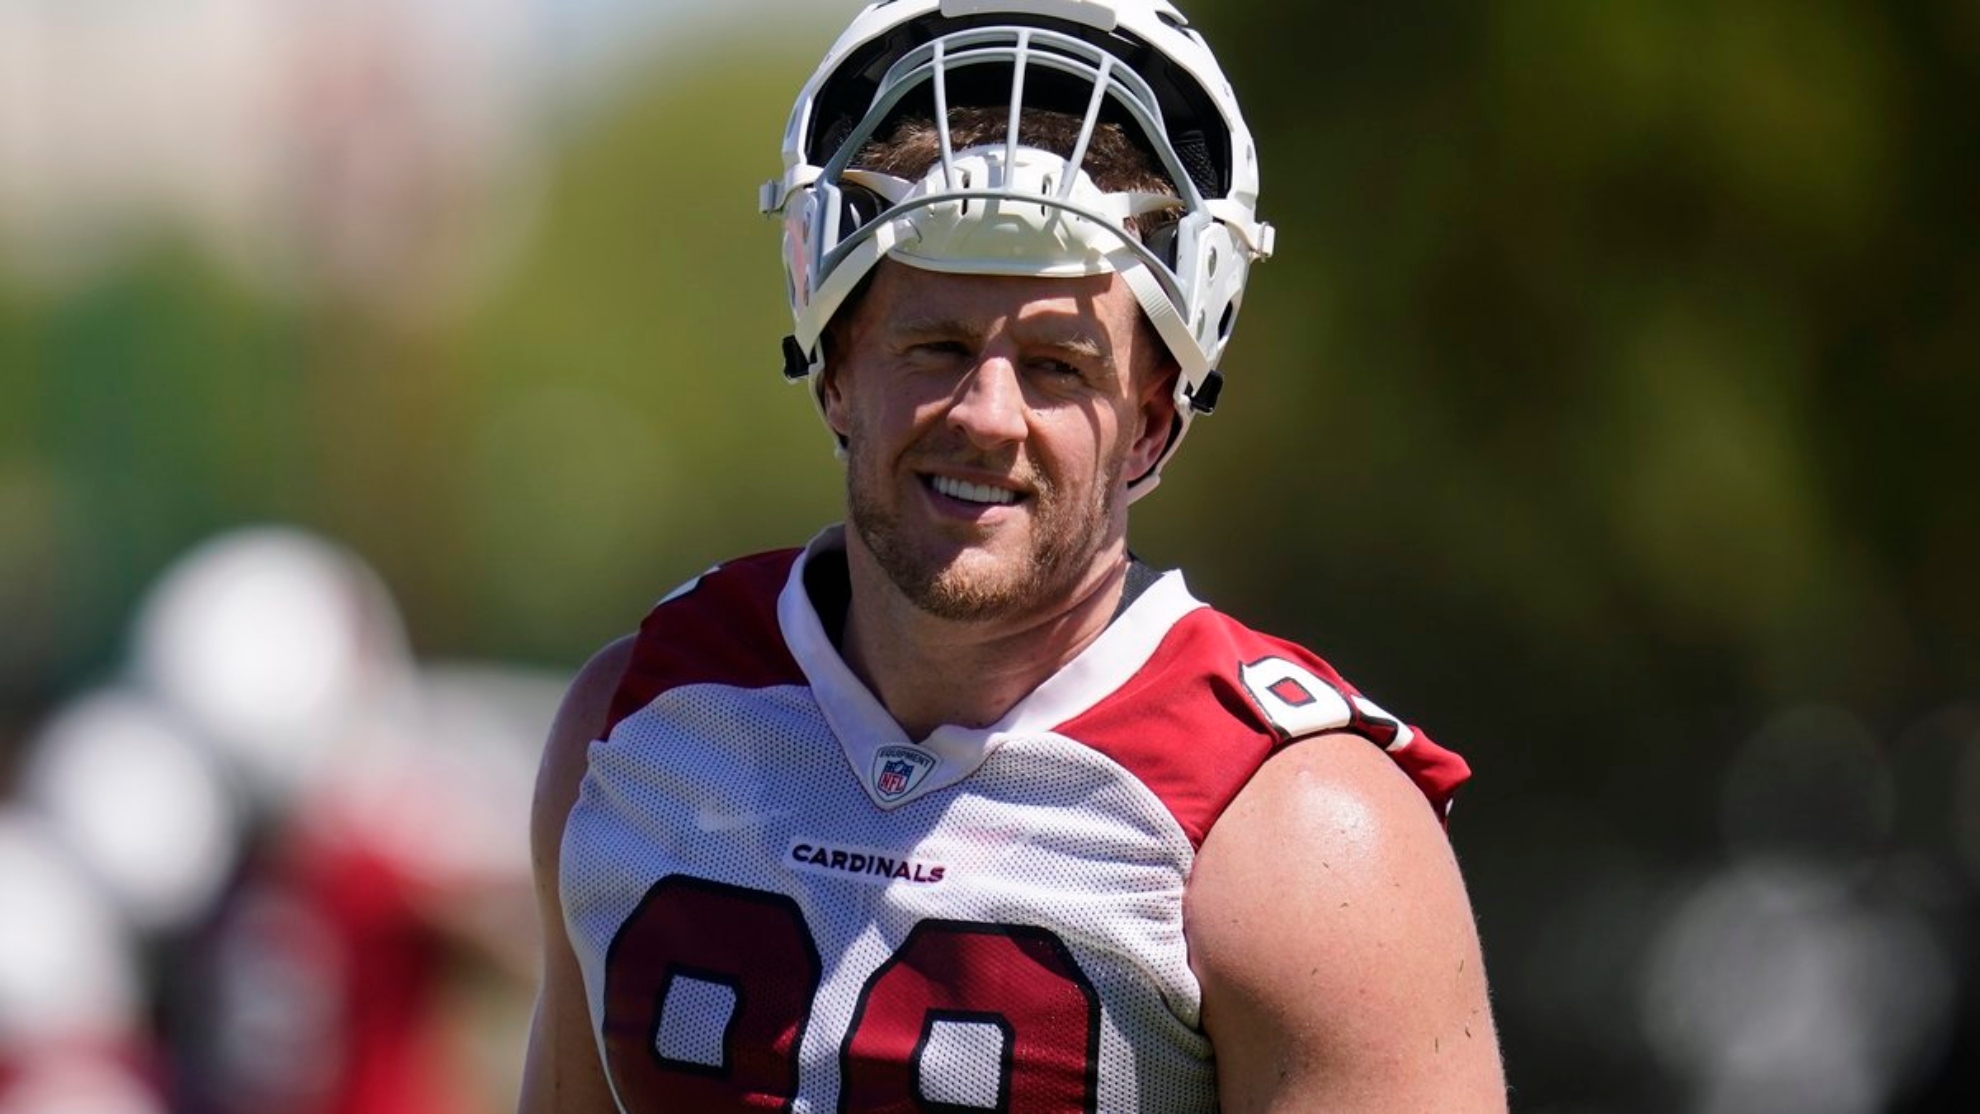 J.J. Watt offers to pay the funeral of a fan's grandfather